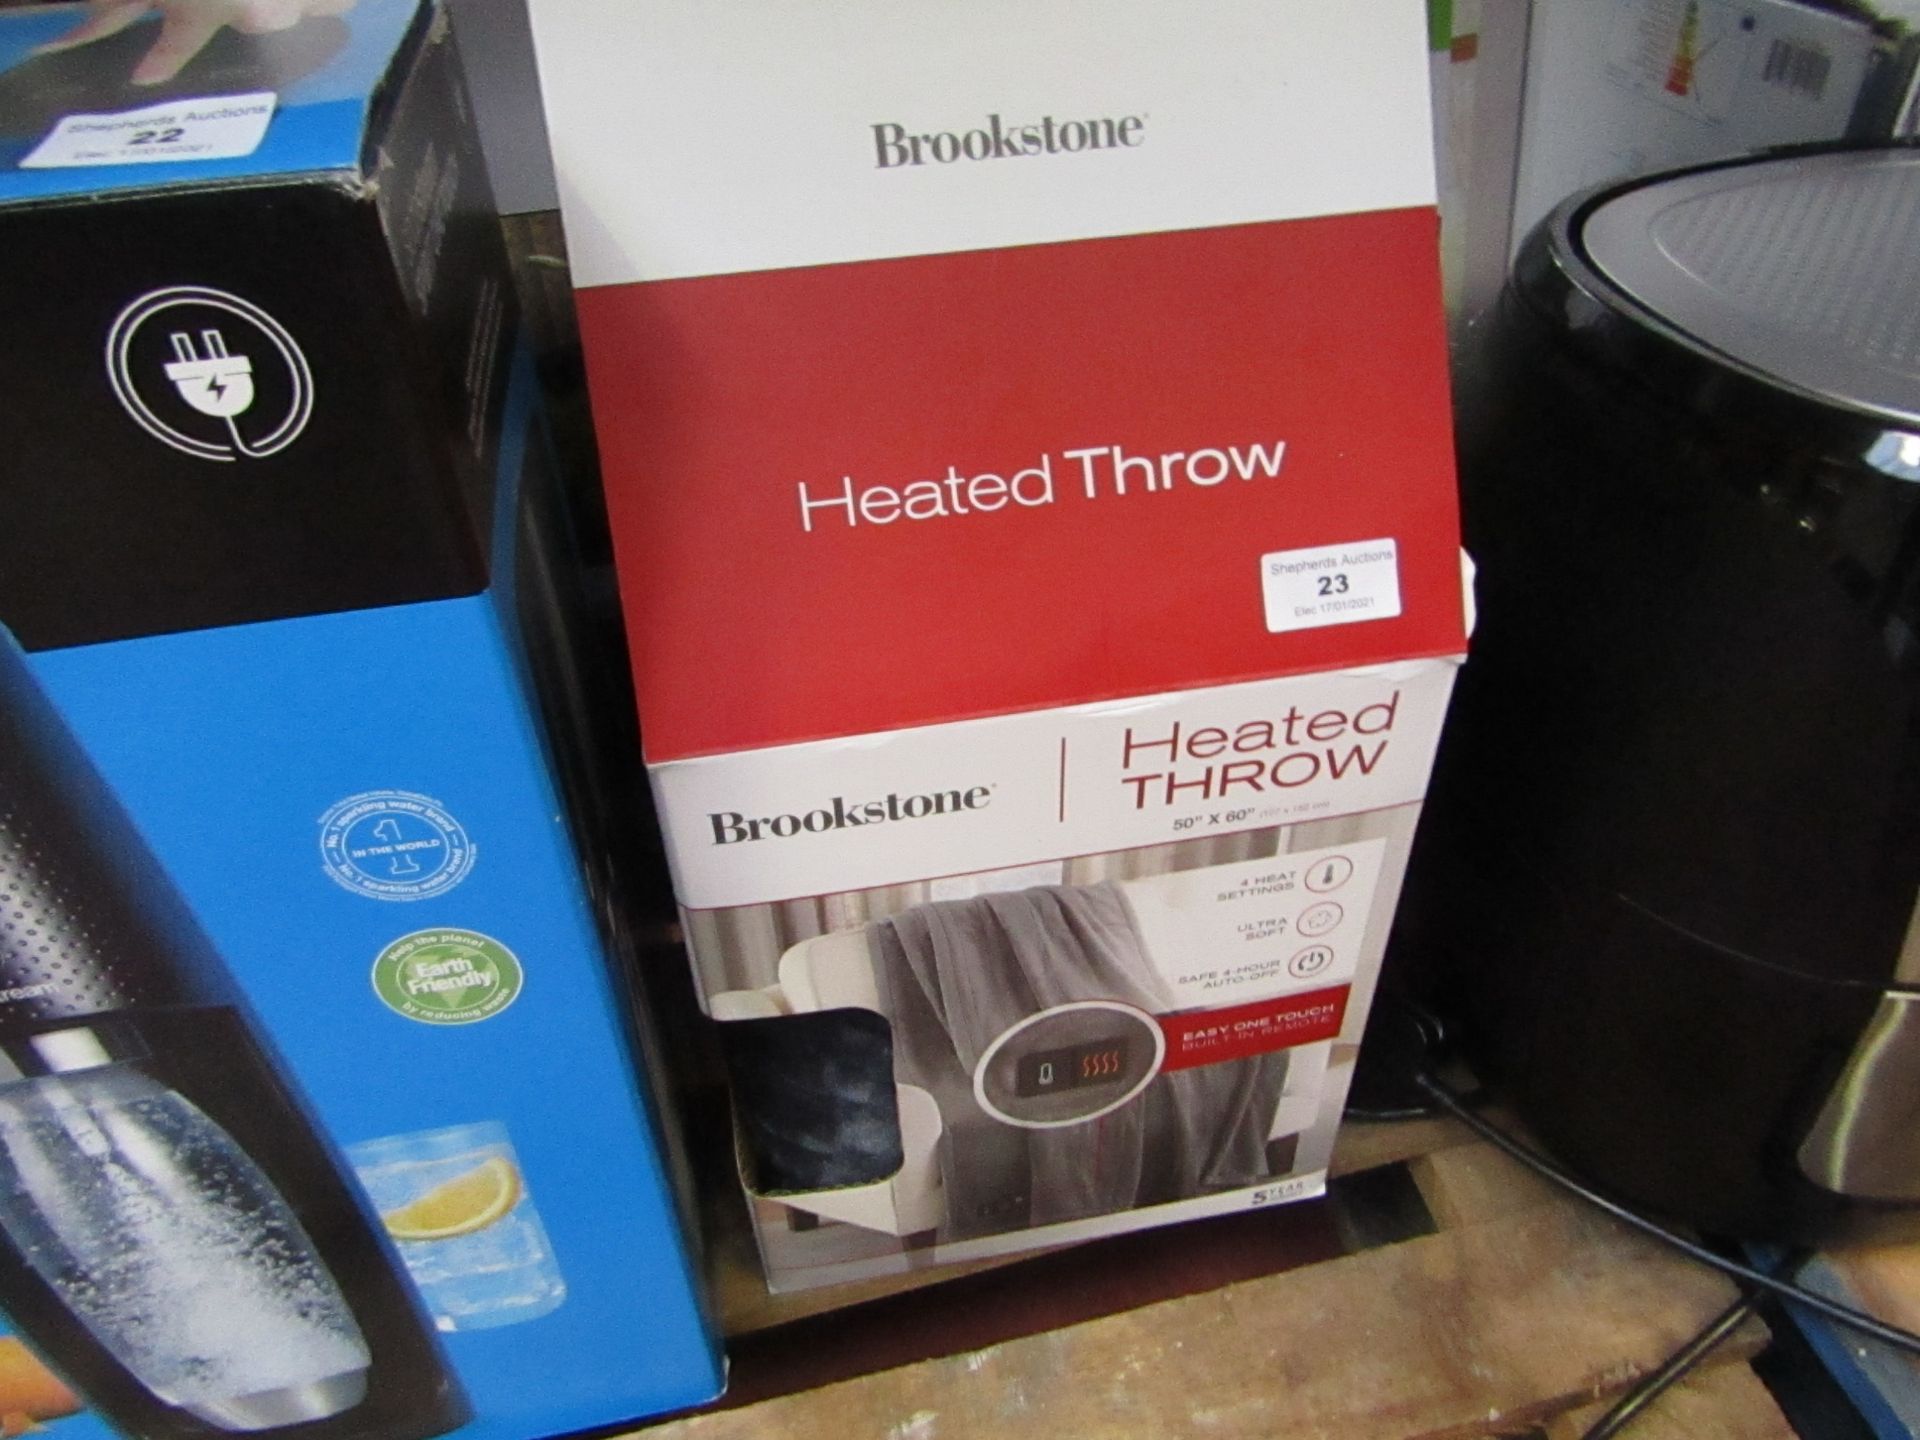 Brookstone heated throw 50 x 60", unchecked and boxed.